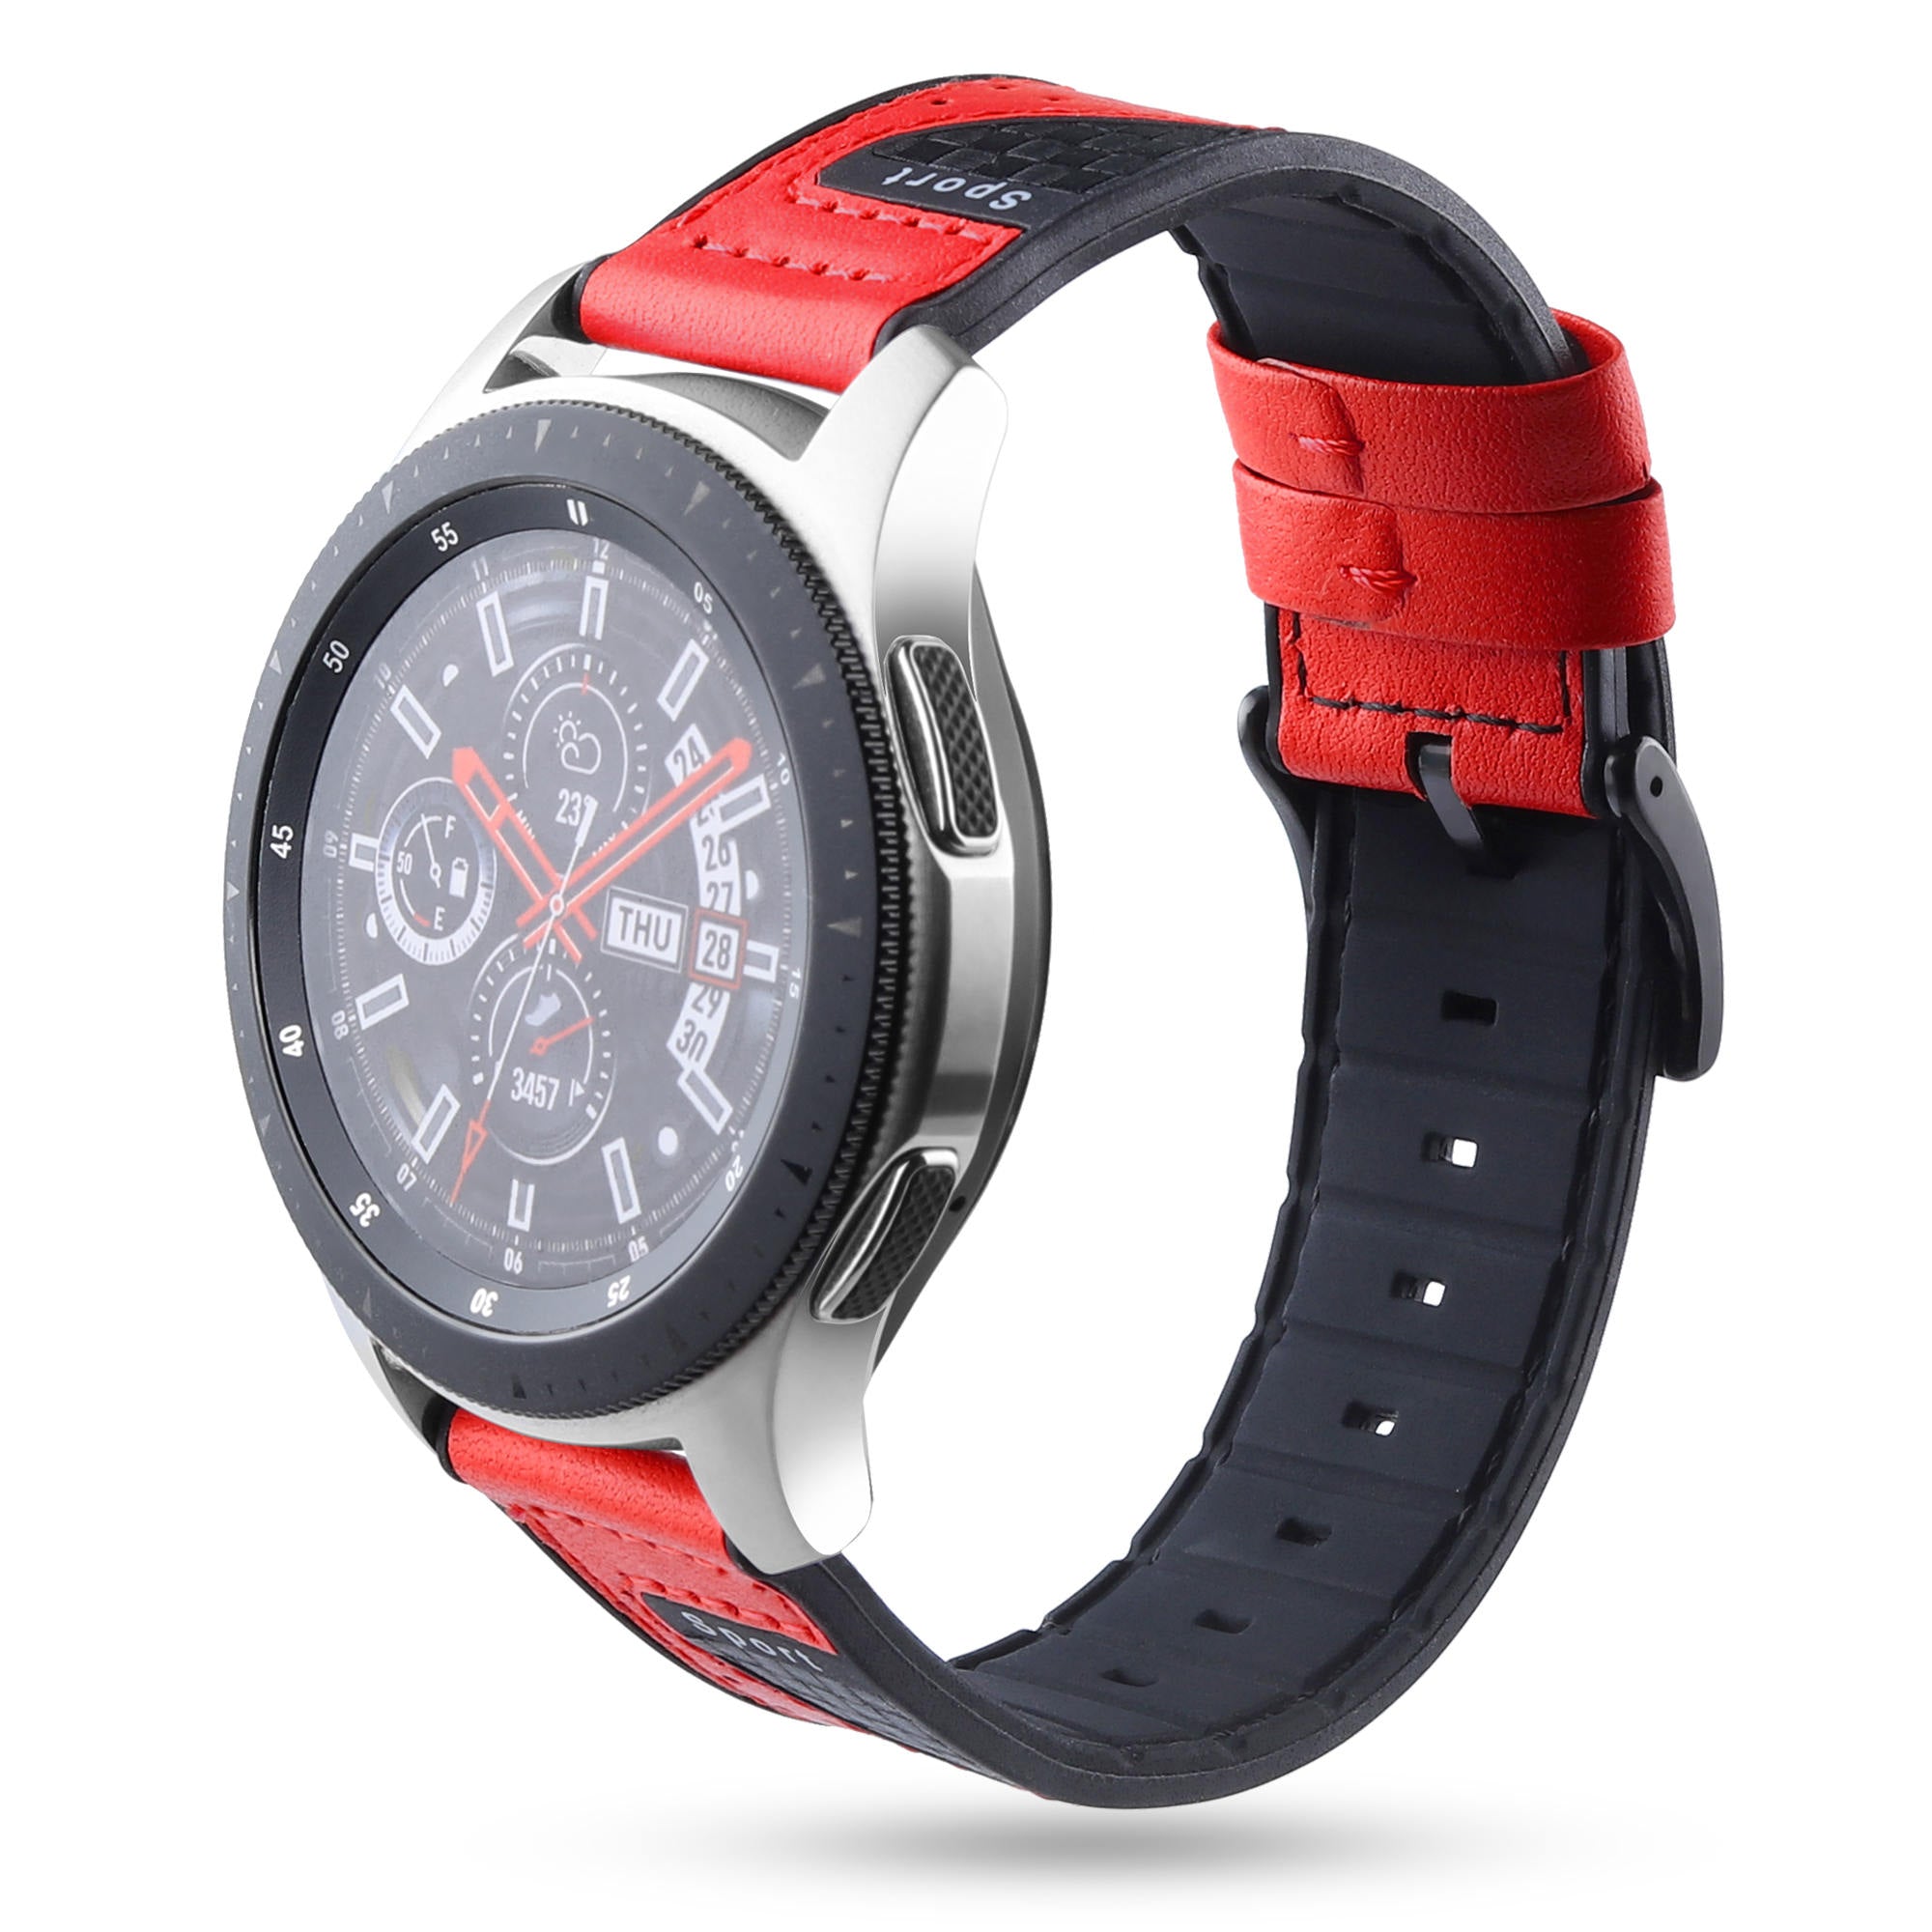 22mm Carbon Fiber Leather Coated Silicone Watch Strap for Huawei Watch GT2/Galaxy Watch 46mm etc. - Red